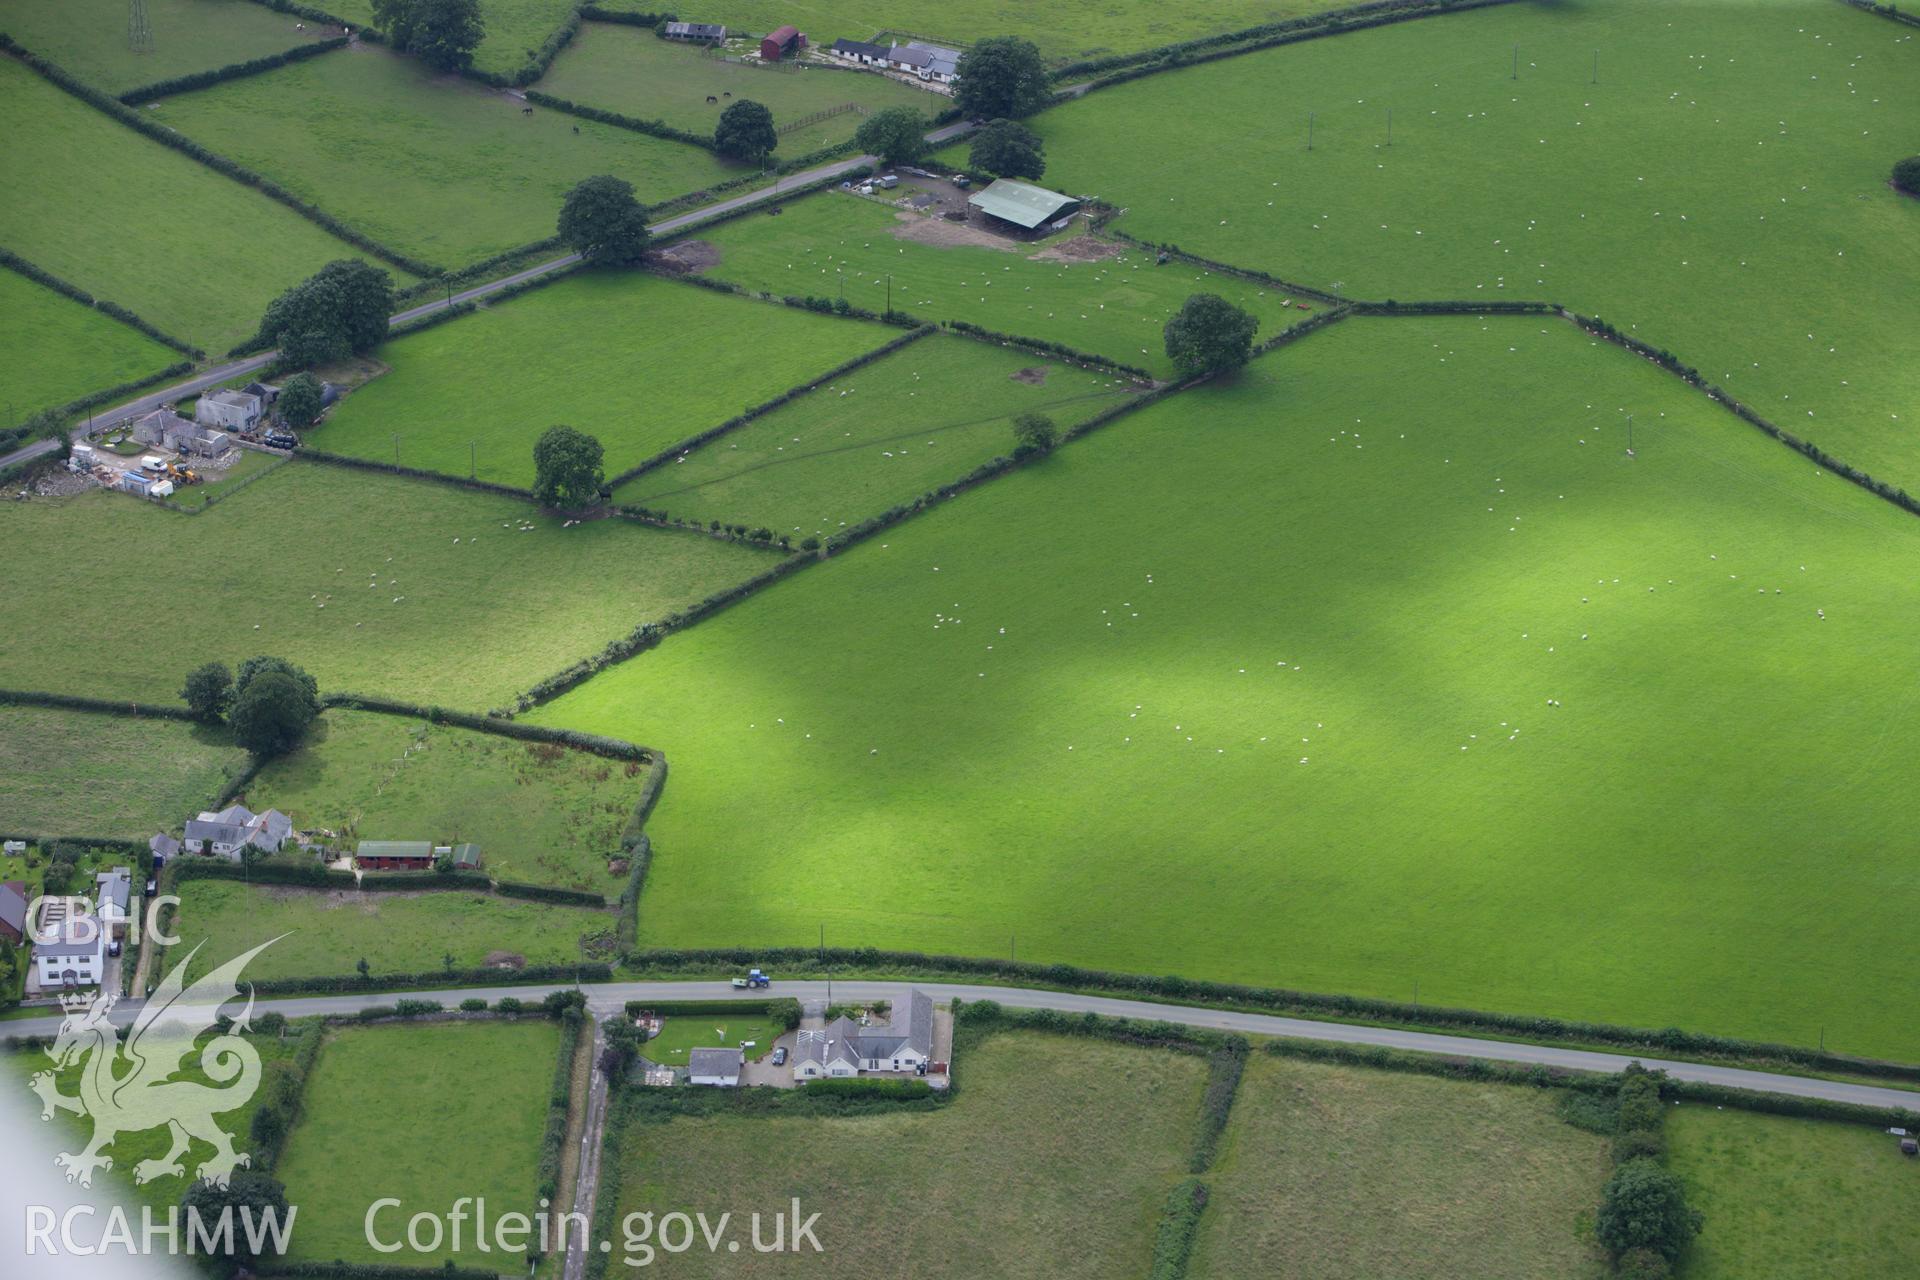 RCAHMW colour oblique aerial photograph of Plas Newydd Round Barrow. Taken on 30 July 2009 by Toby Driver